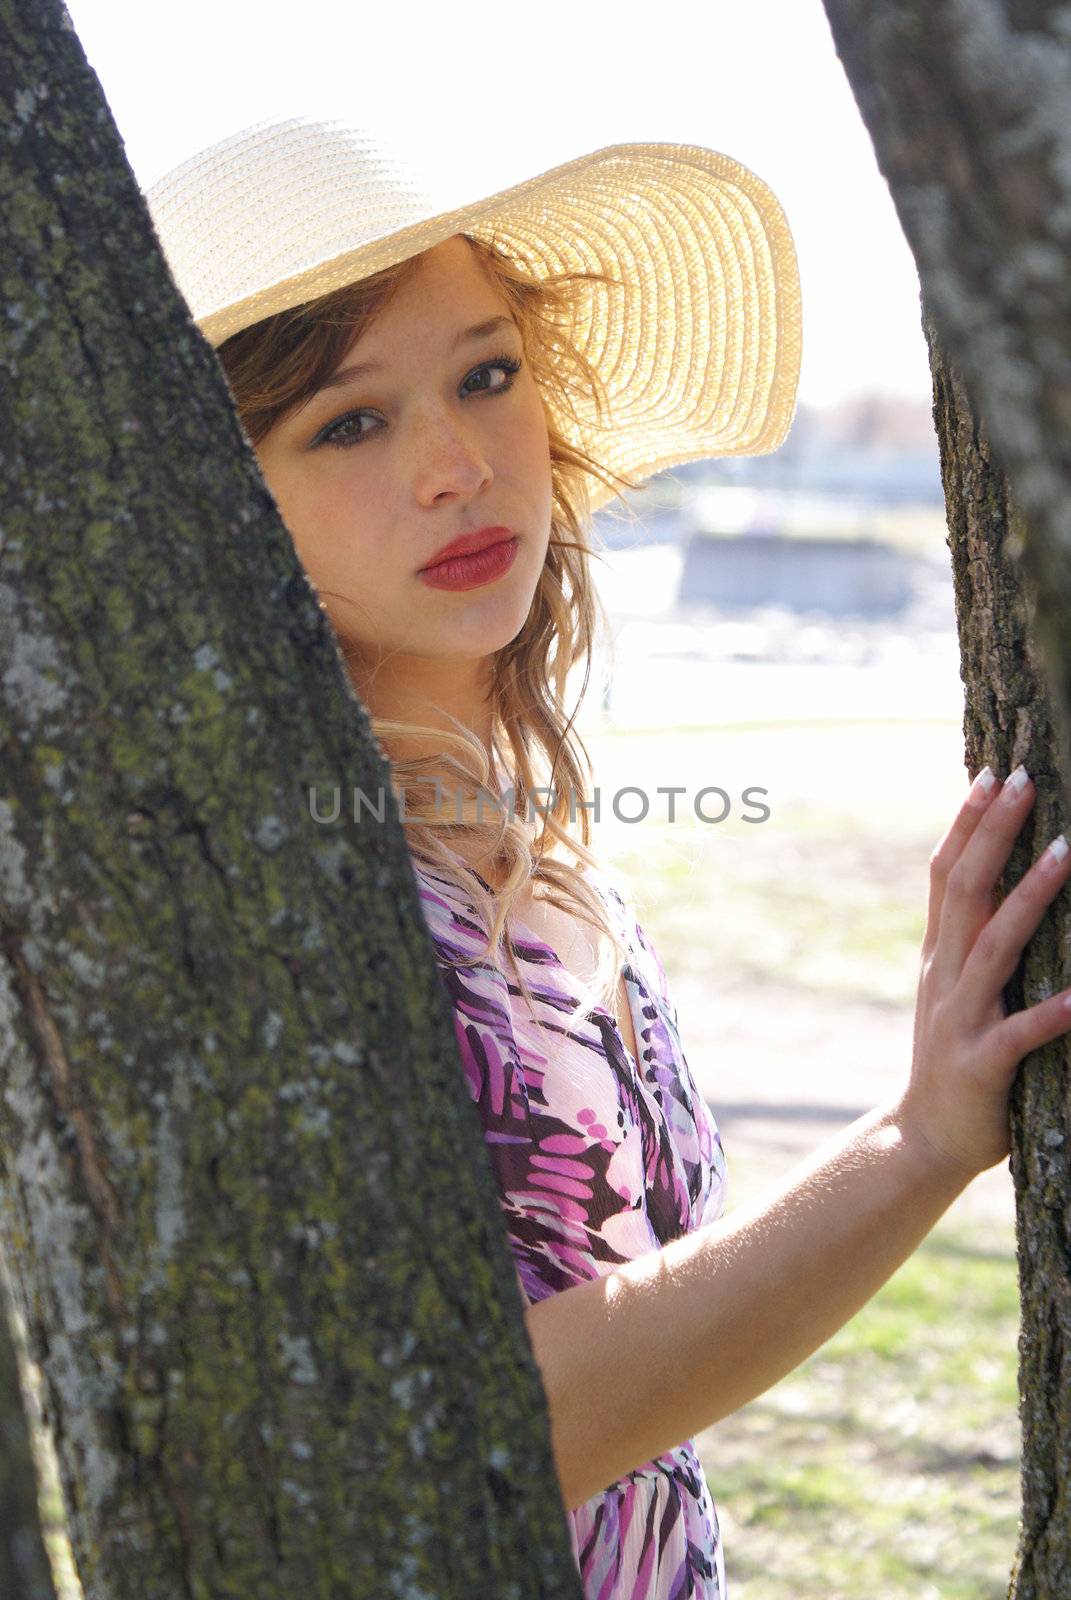 A young woman stands in the sunshine next to a tree.